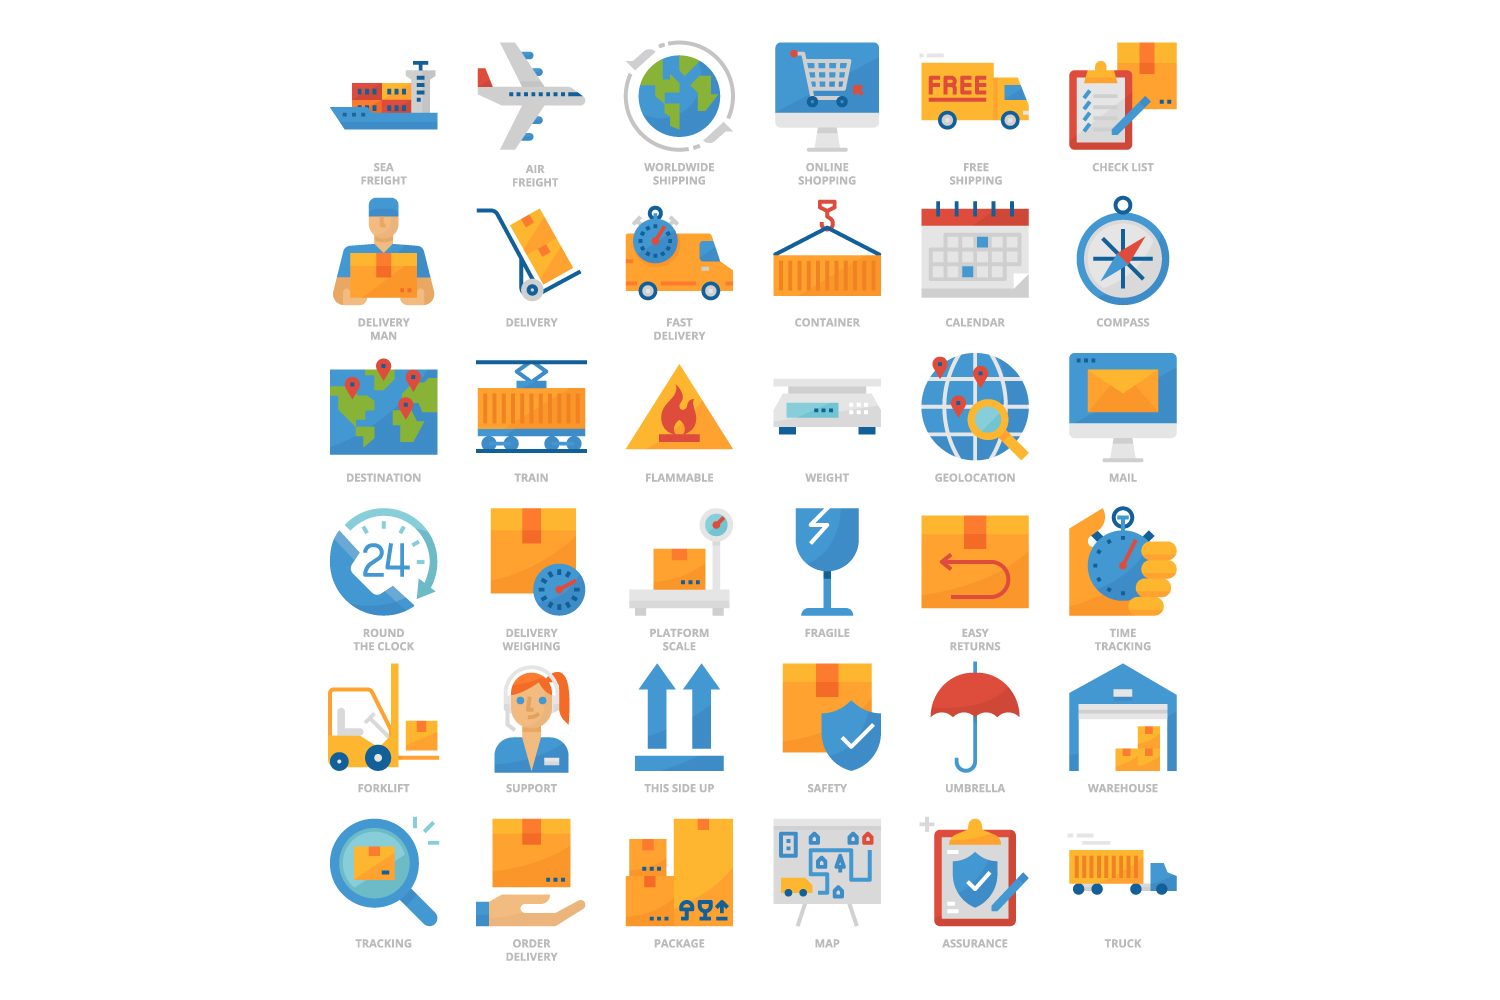 Set of flat icons depicting different types of transportation.